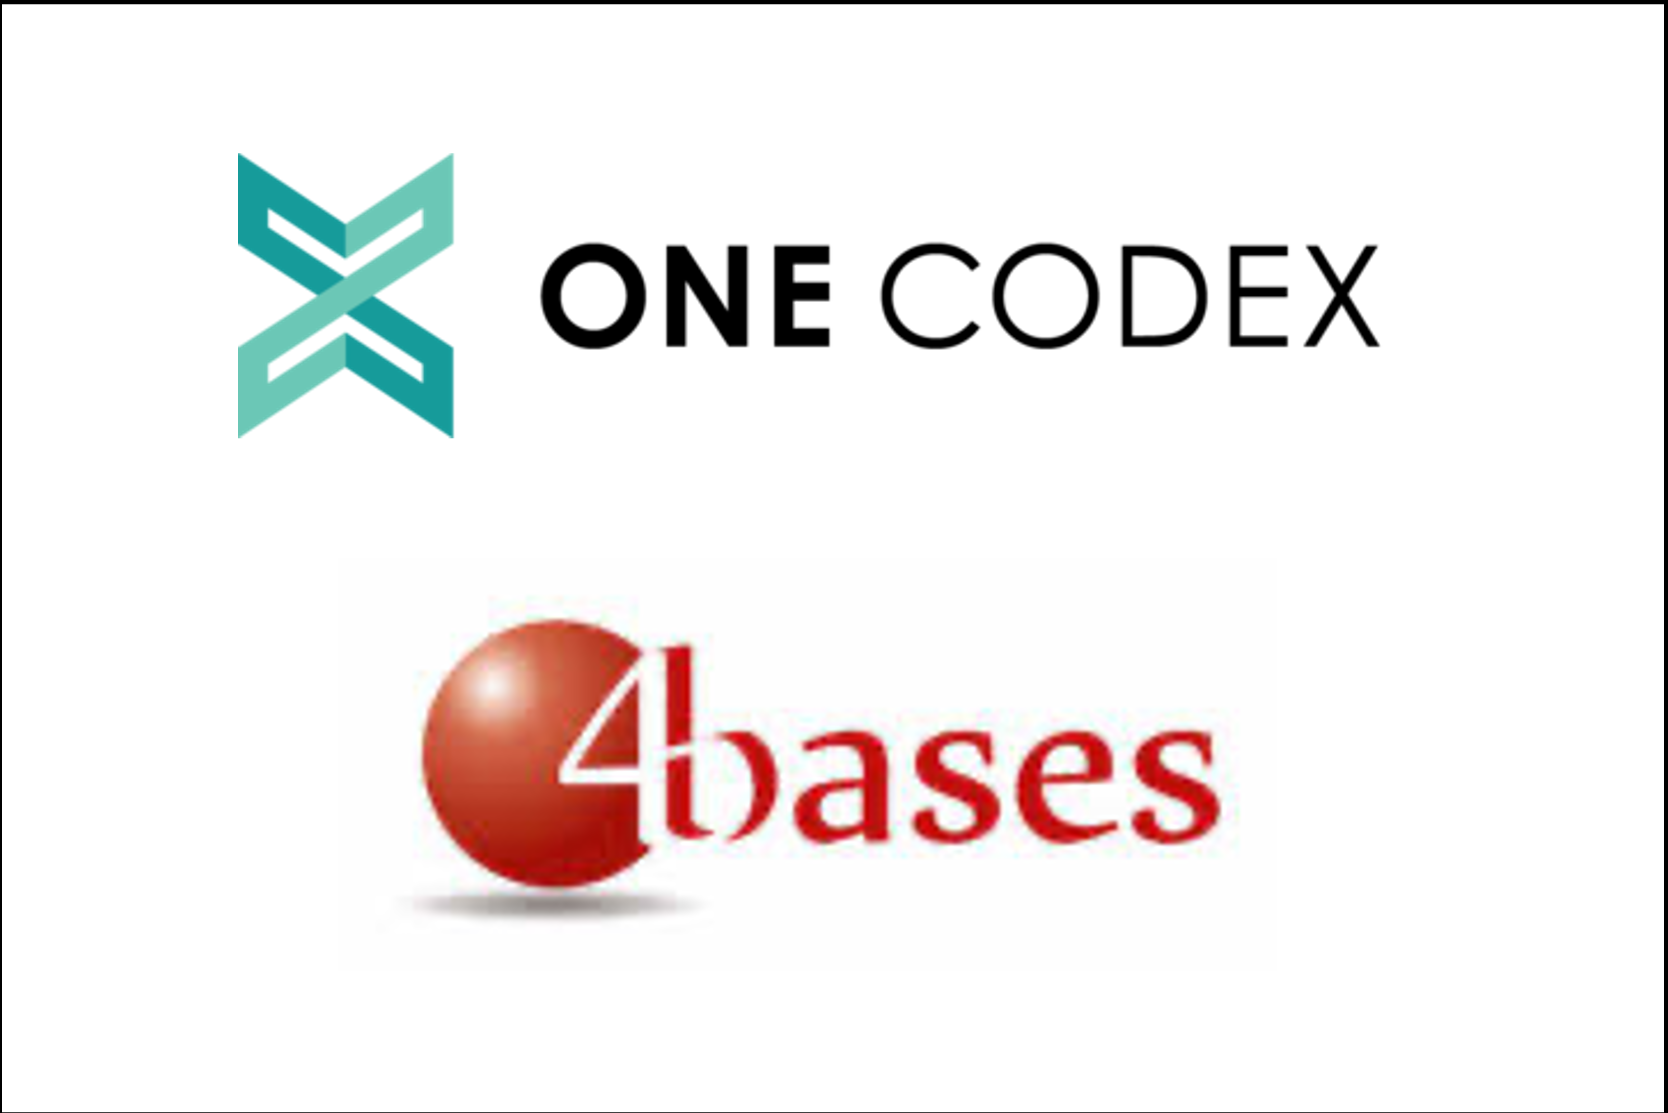 One Codex, 4bases Ink Collaboration for Clinical Microbiome Analysis Solutions